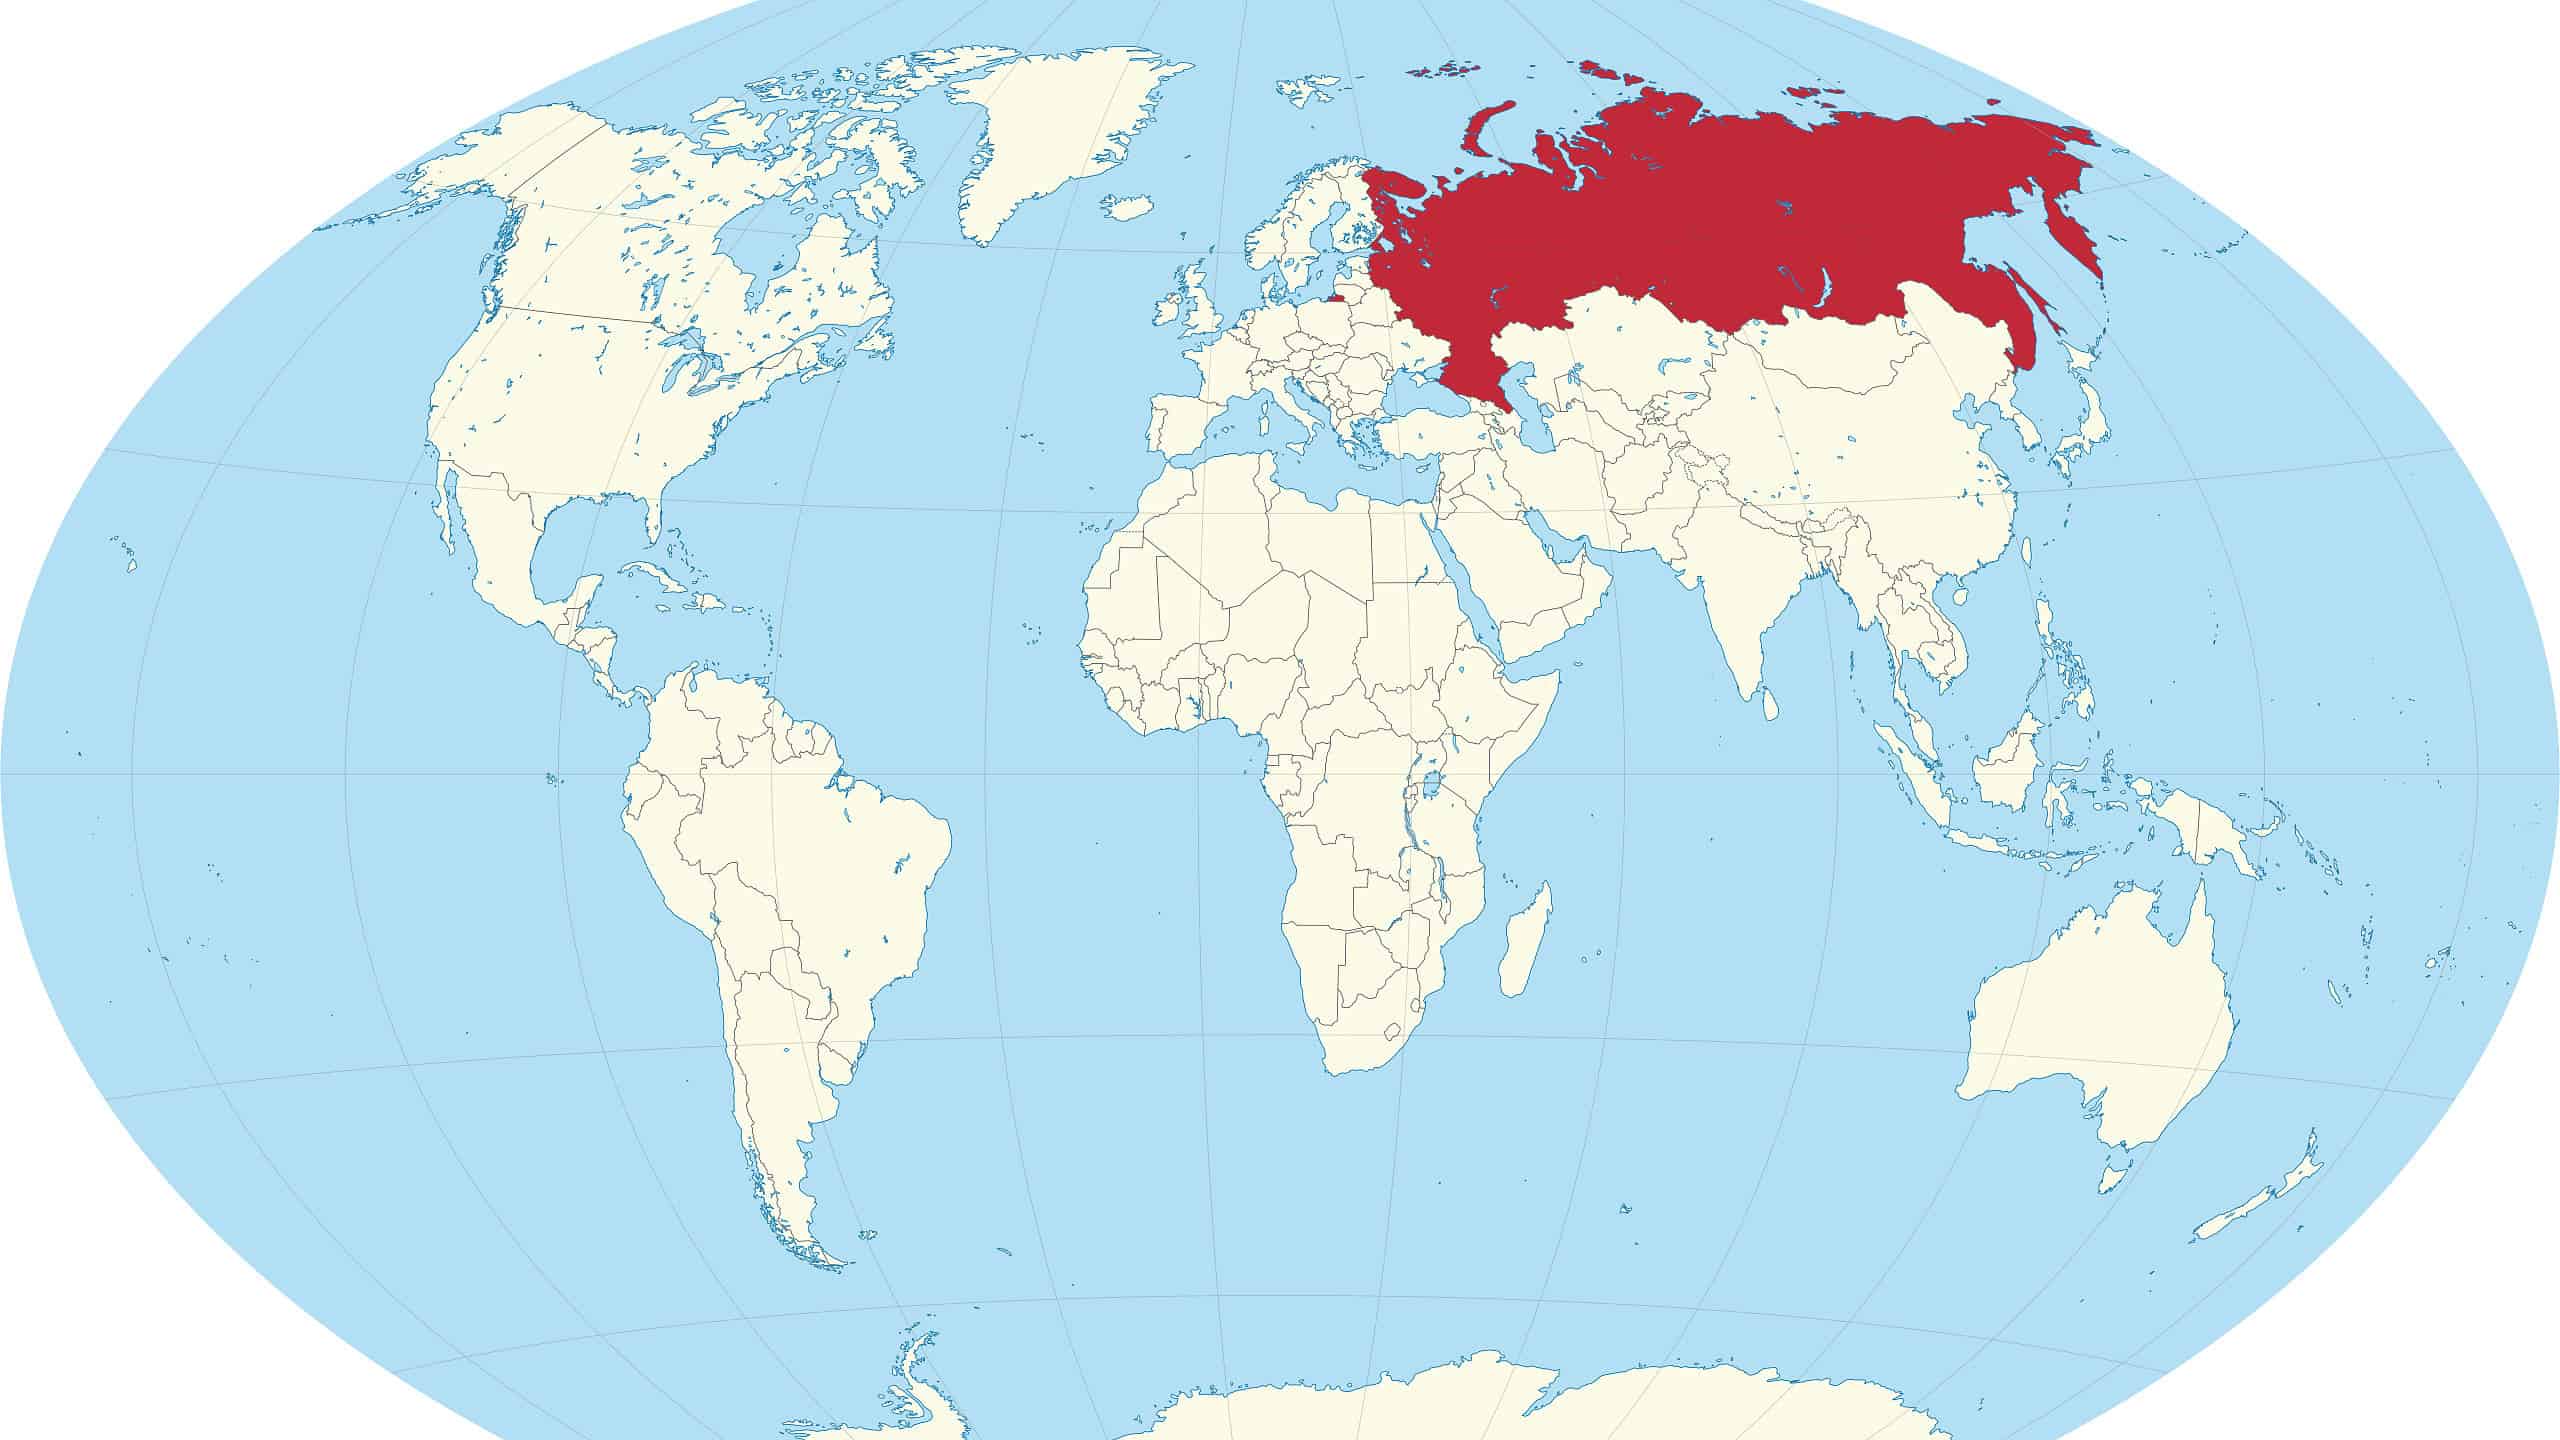 Russia on global map